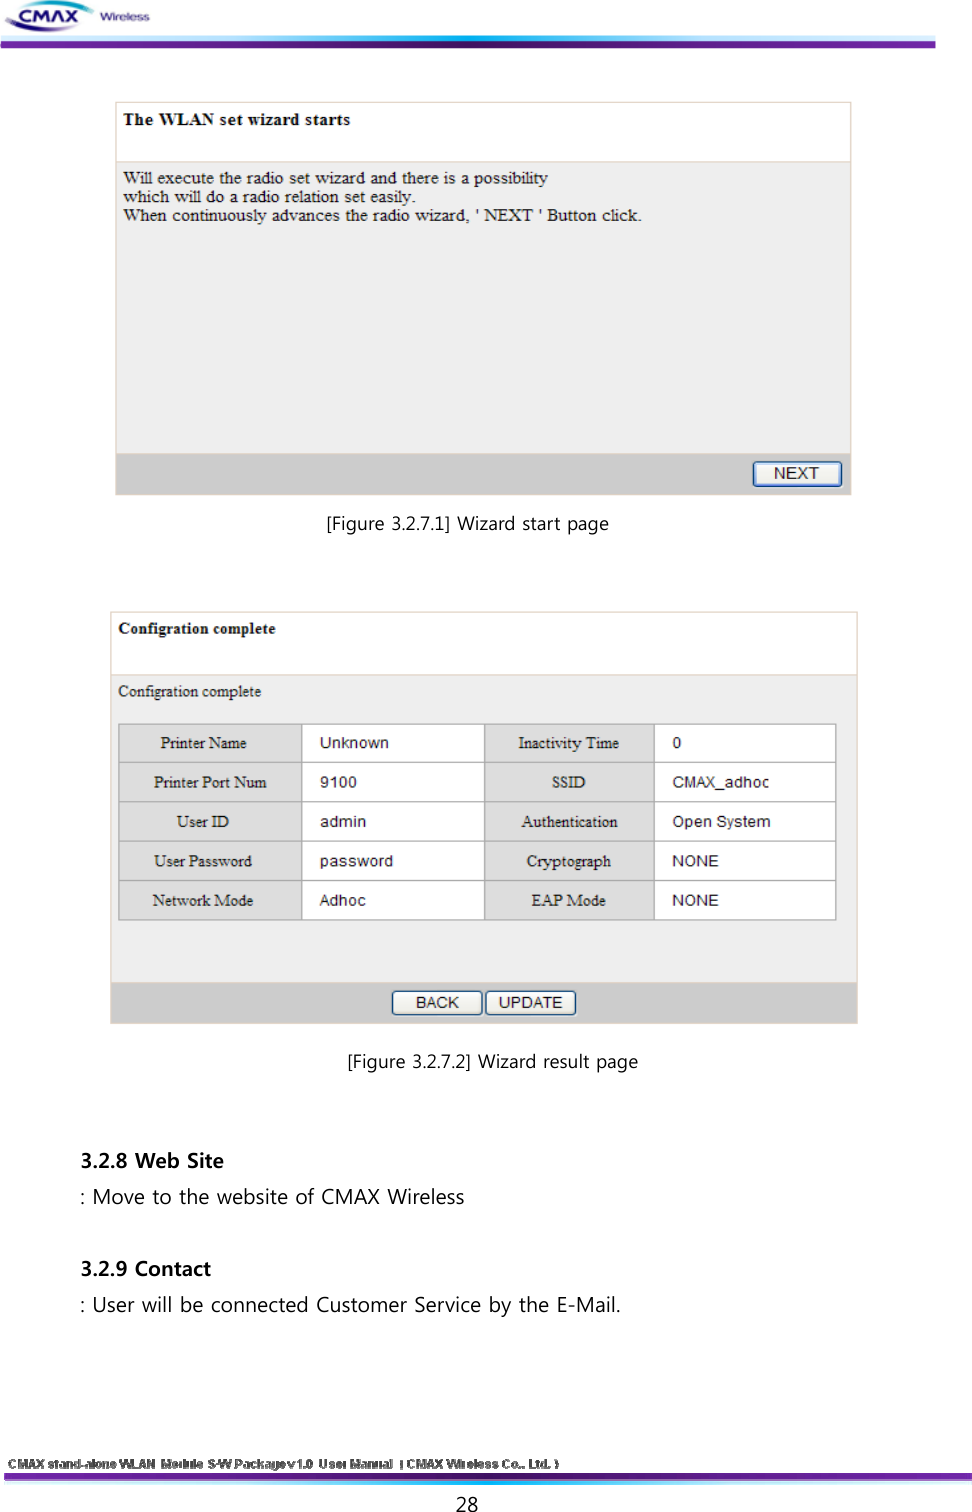   28   [Figure 3.2.7.1] Wizard start page    [Figure 3.2.7.2] Wizard result page   3.2.8 Web Site : Move to the website of CMAX Wireless  3.2.9 Contact : User will be connected Customer Service by the E-Mail.    